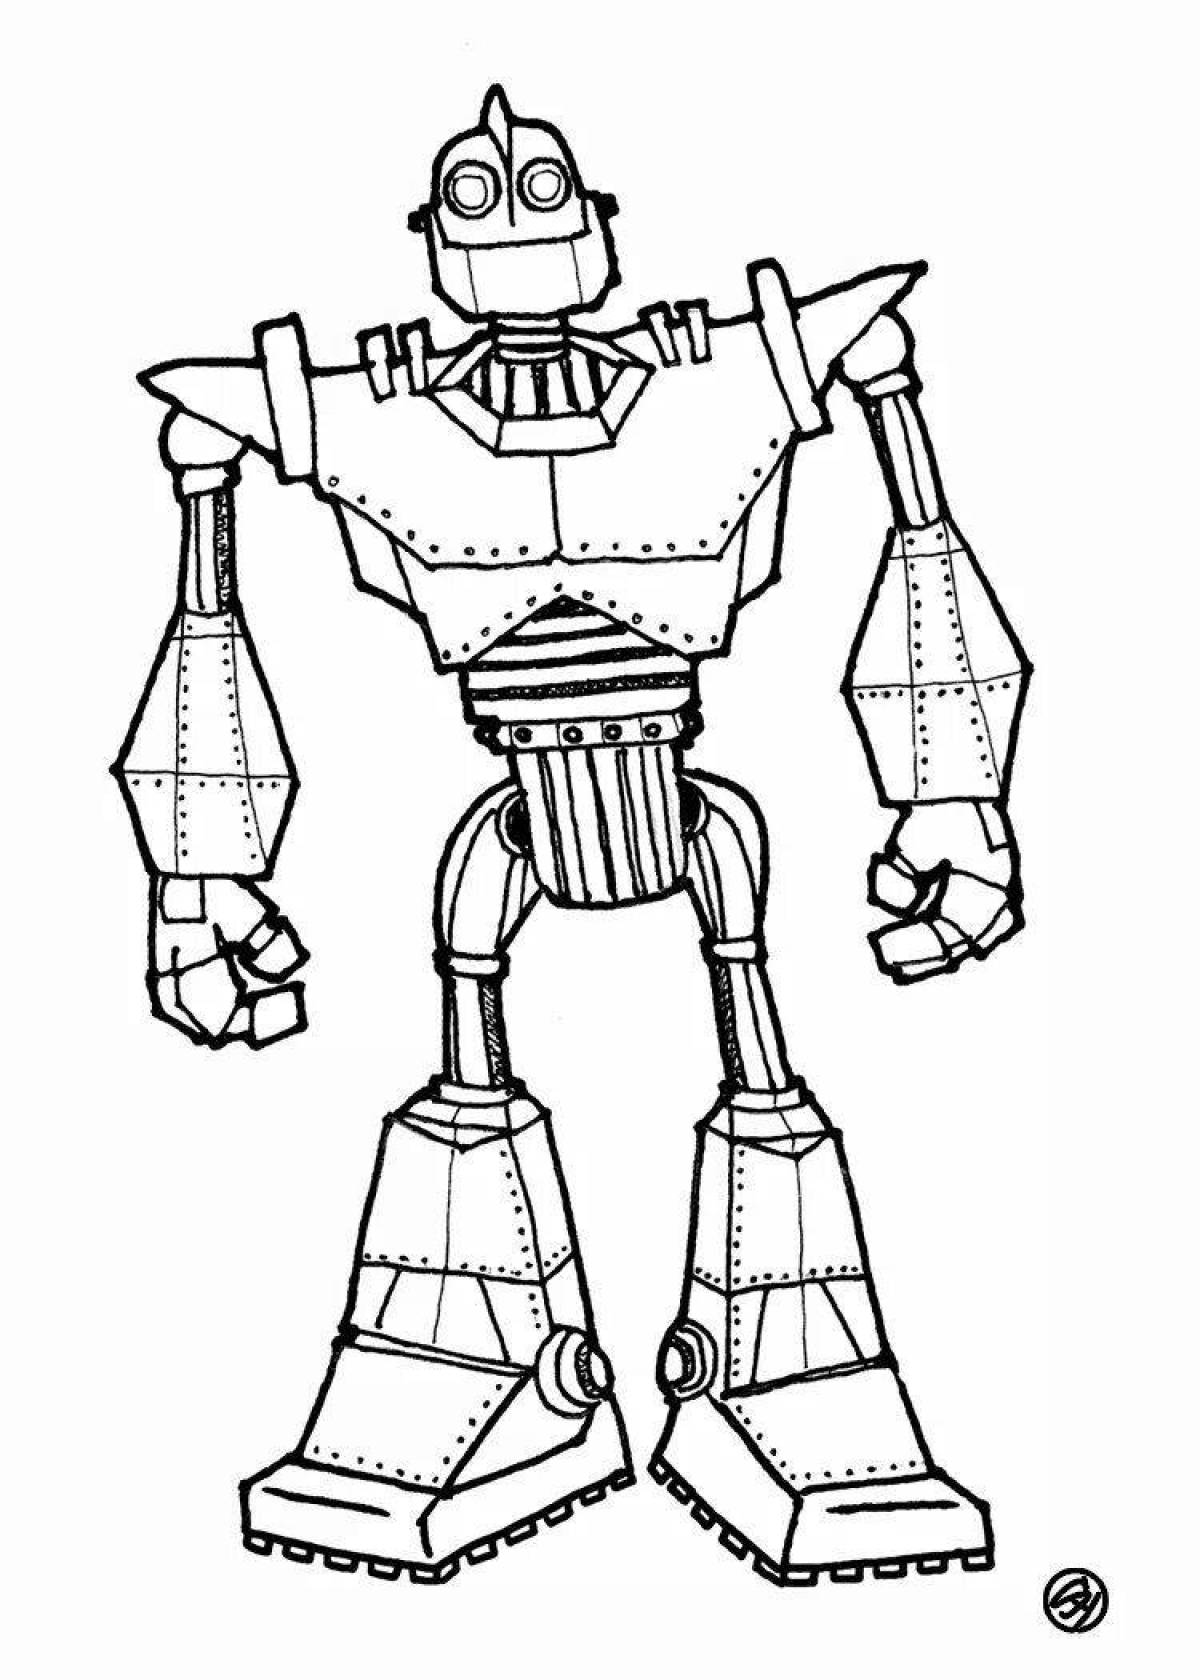 Chilling killer robots coloring page